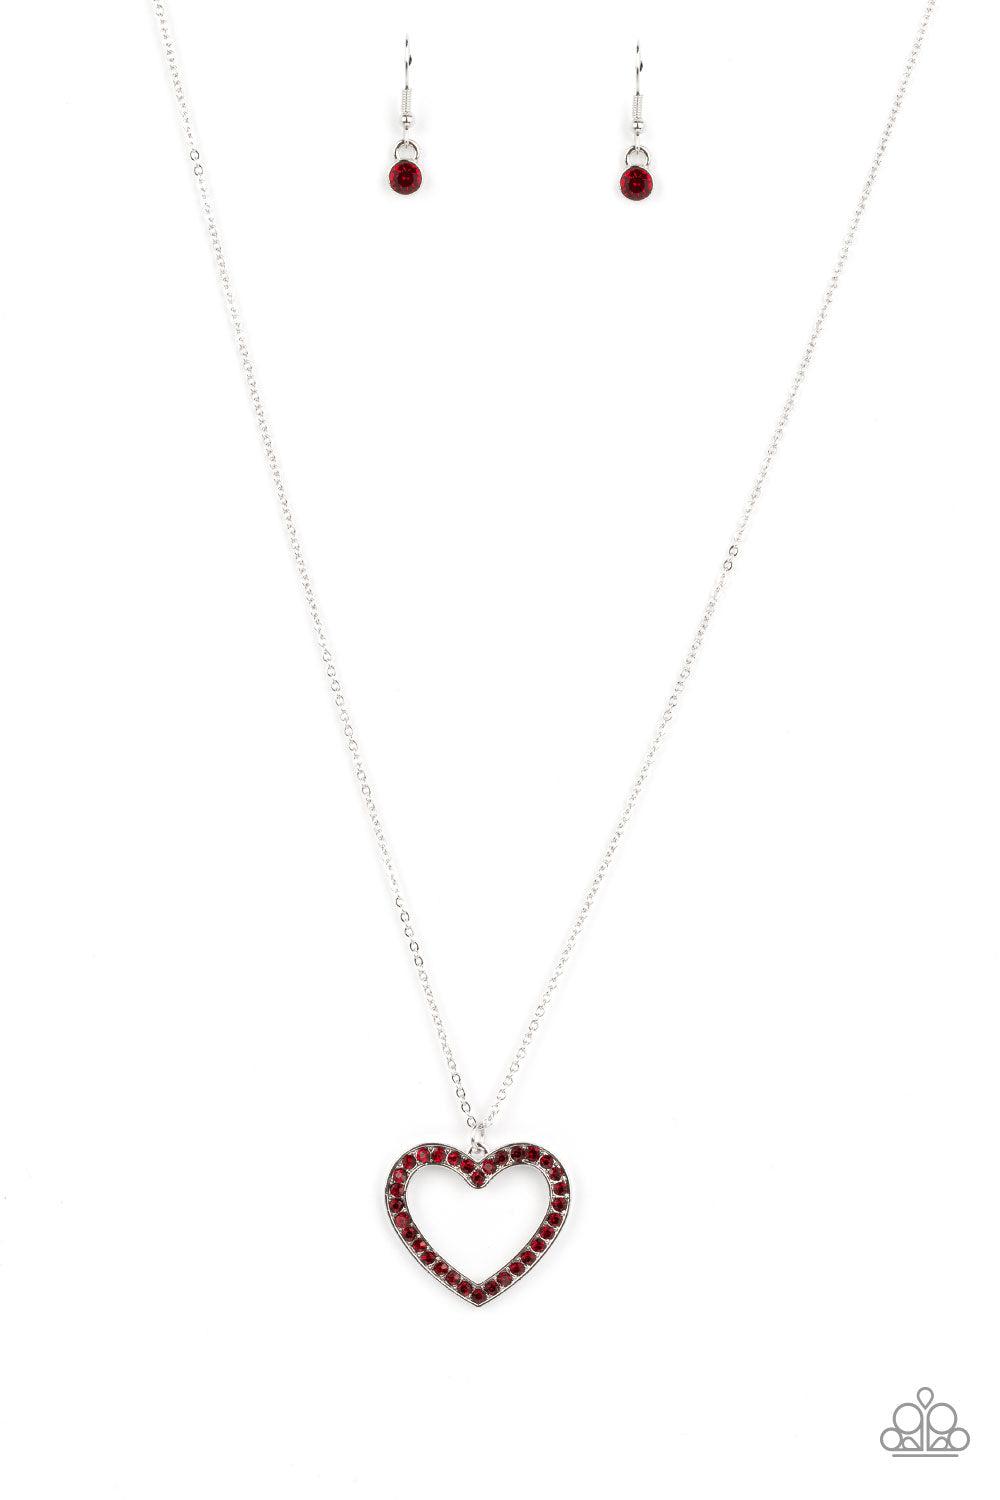 Dainty Darling Red Rhinestone Heart Necklace - Paparazzi Accessories- lightbox - CarasShop.com - $5 Jewelry by Cara Jewels